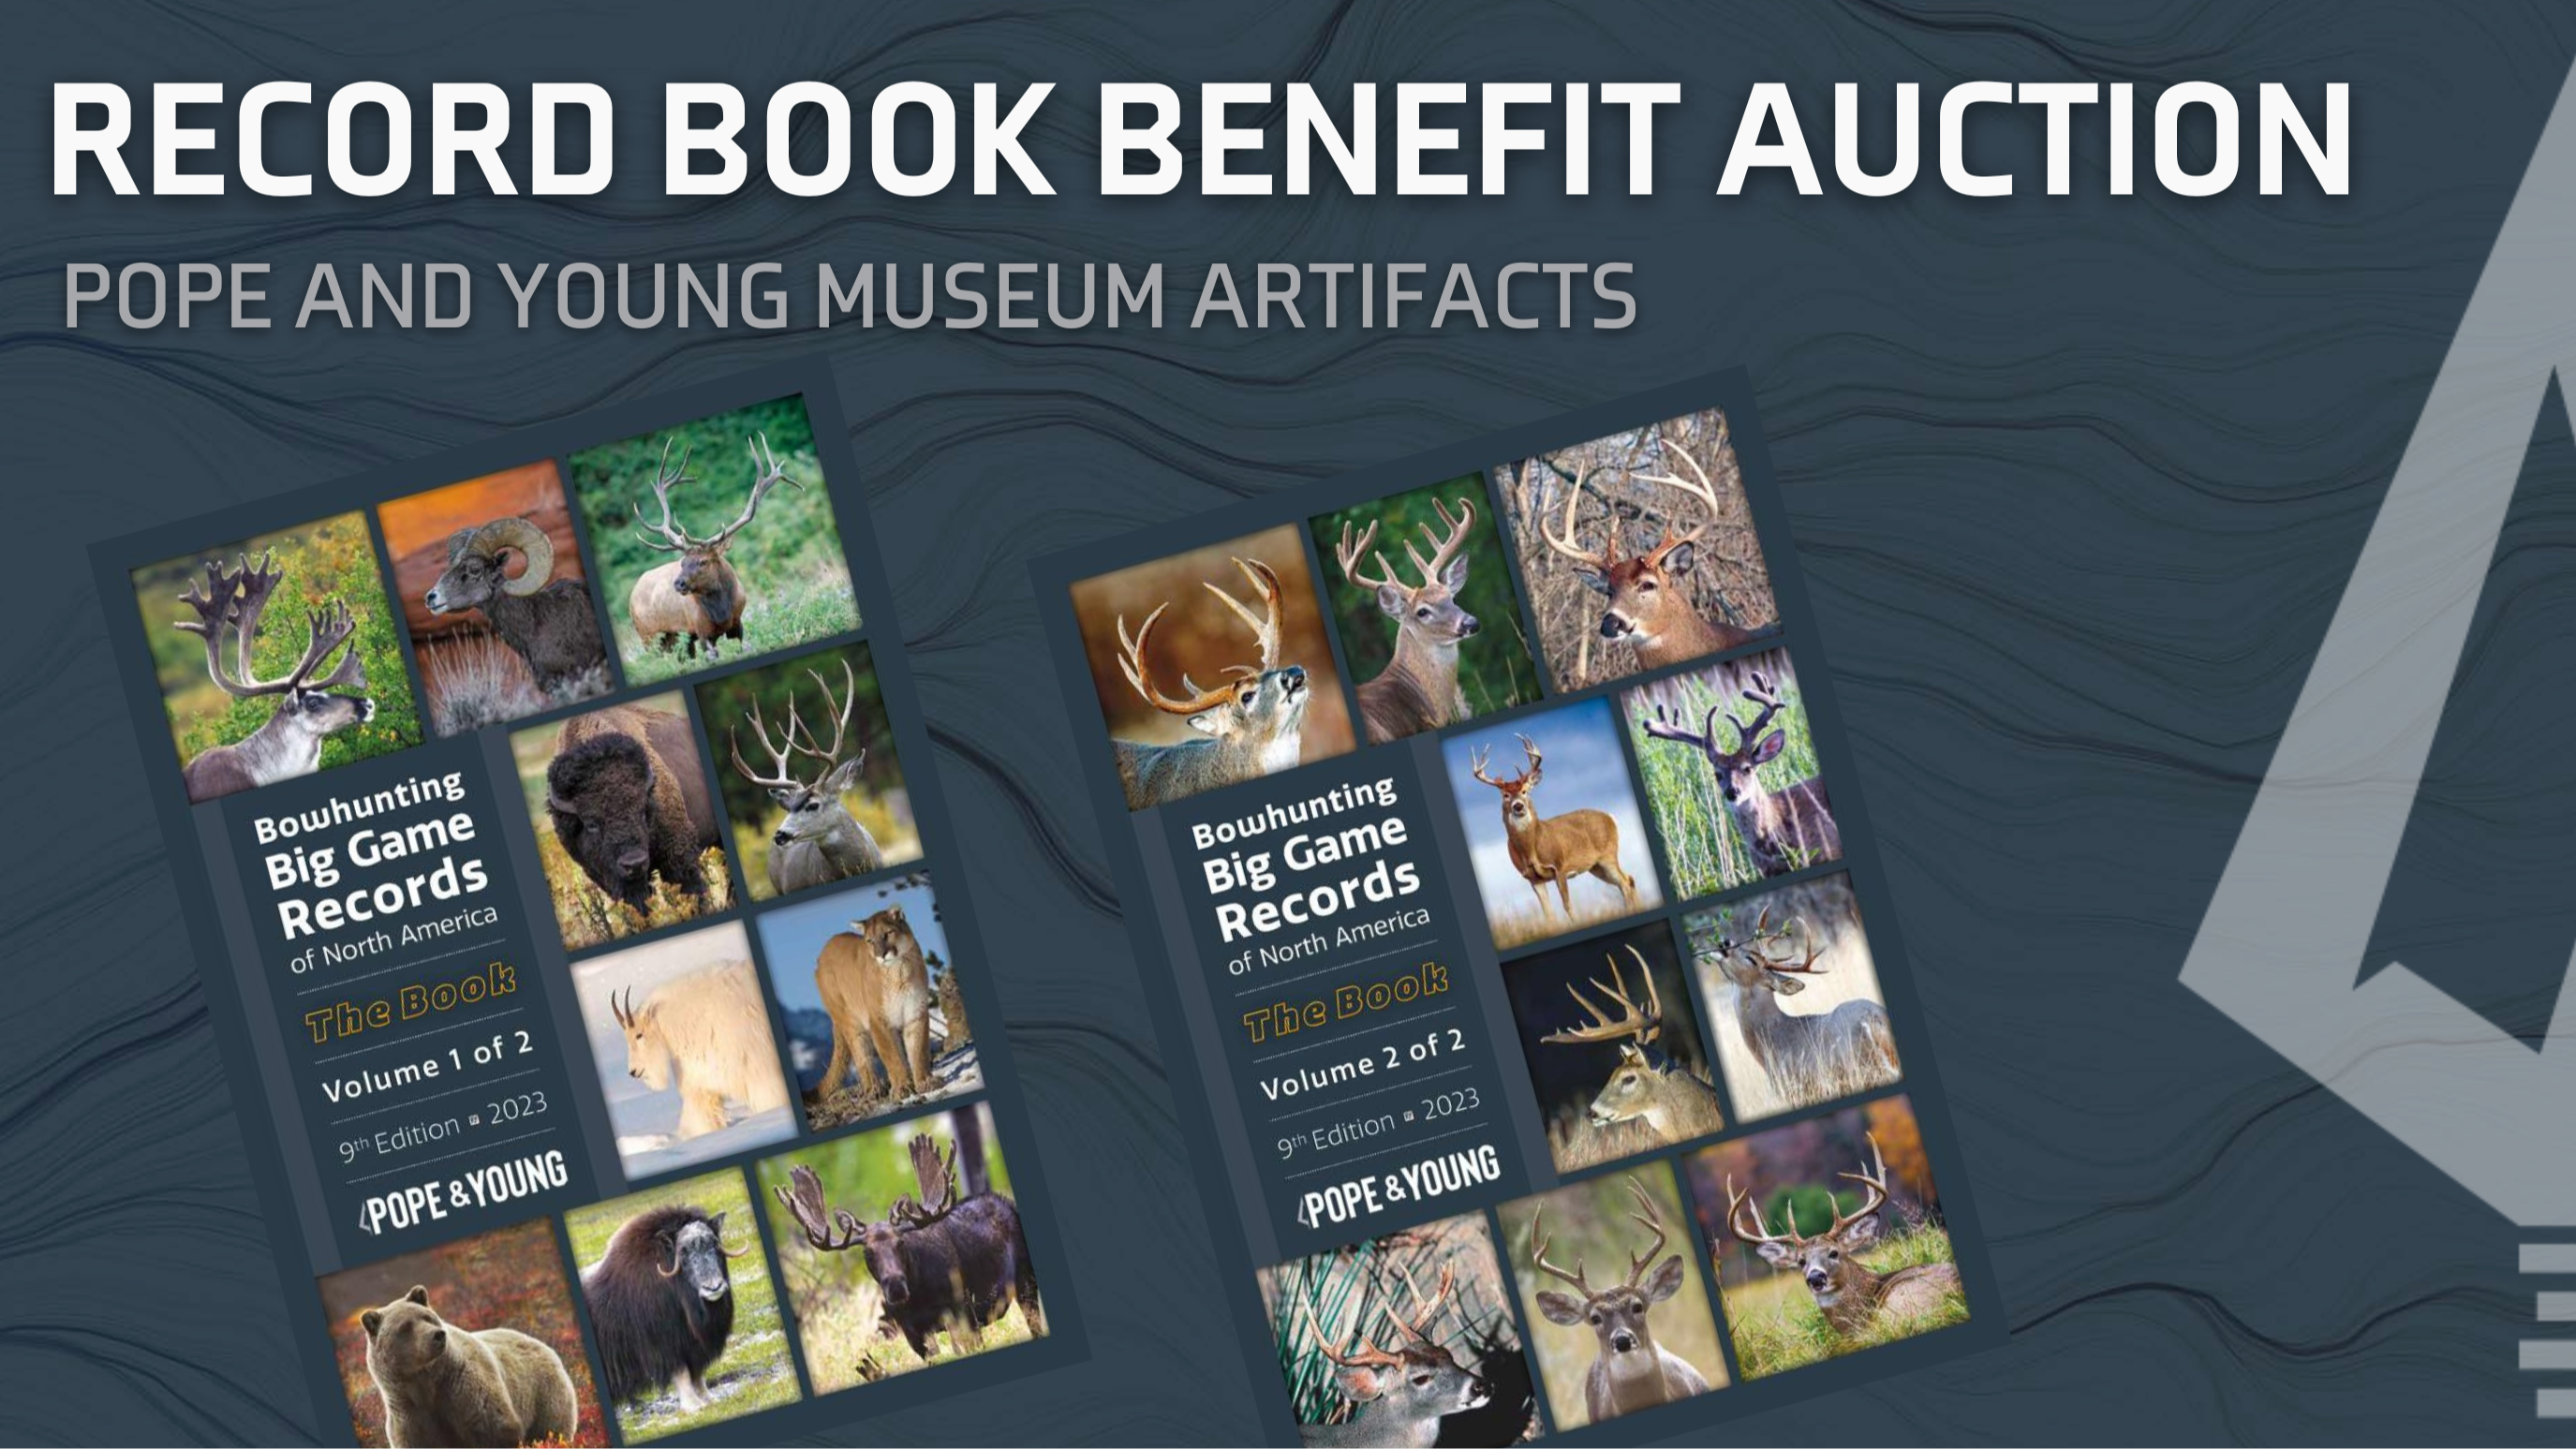 
Pope and Young Announces Record Book Benefit Auction